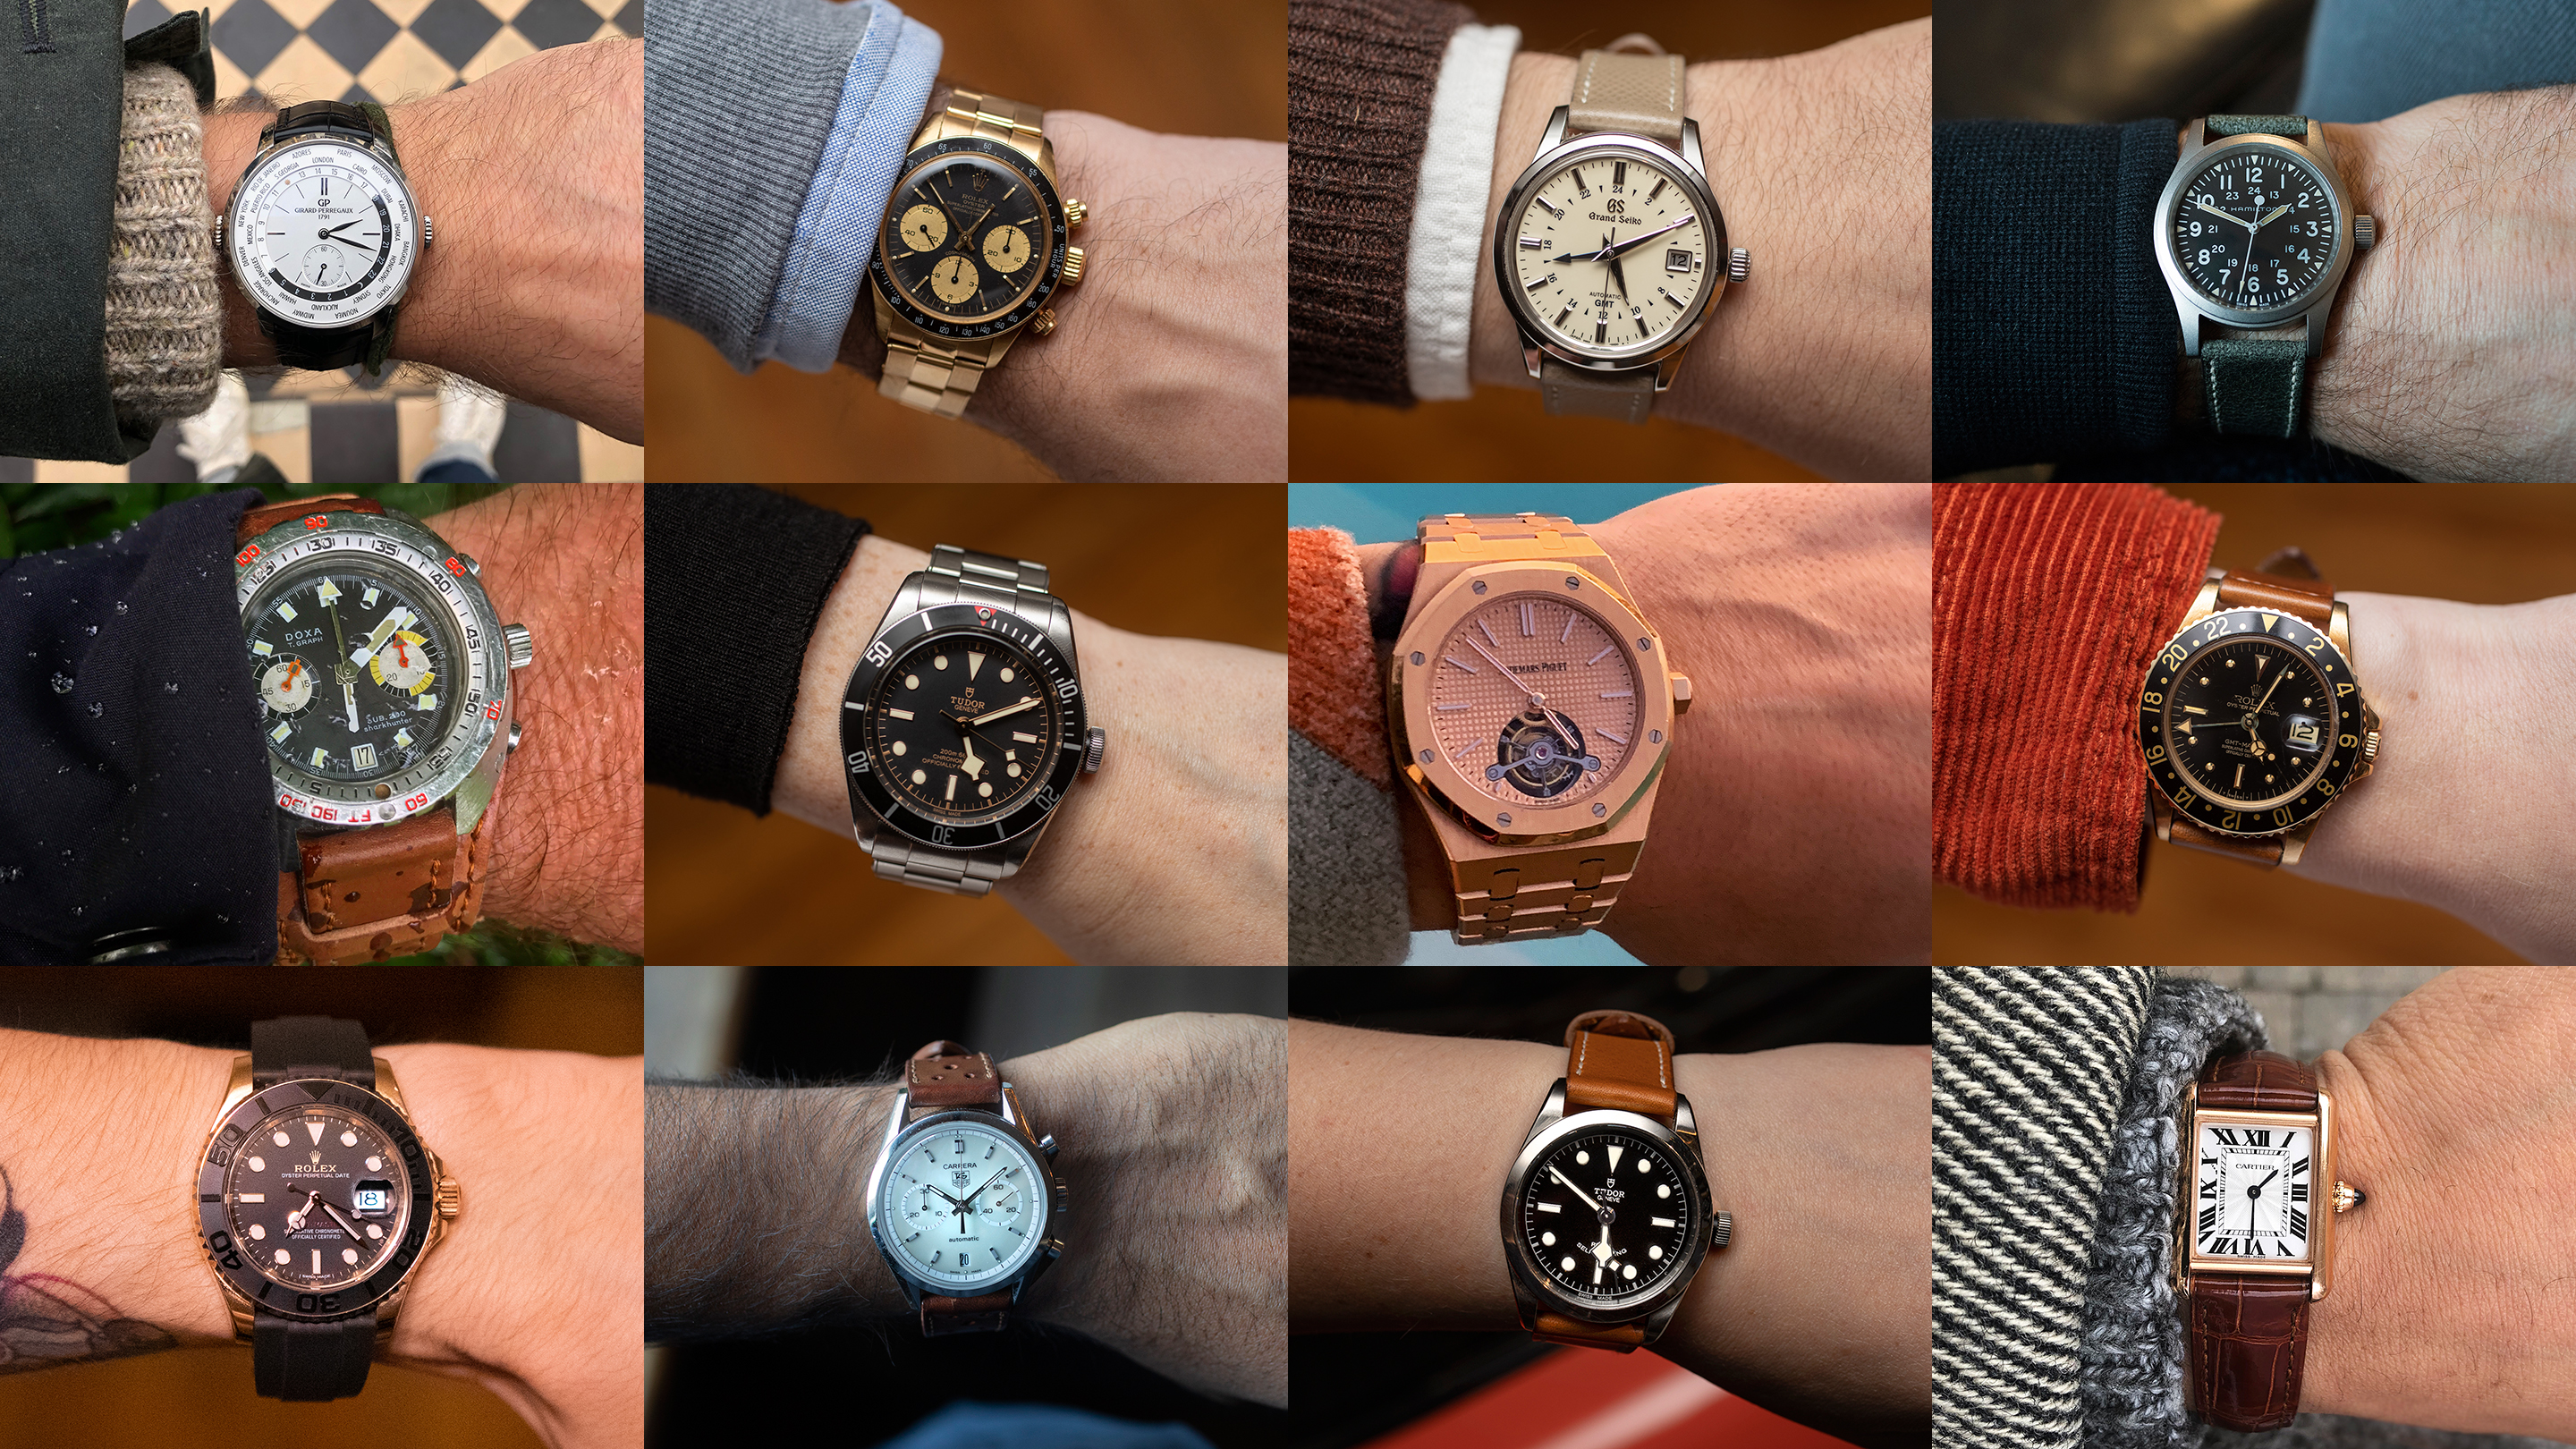 Year In Review The Watch I Wore Most In 2018, By Members Of The HODINKEE Team